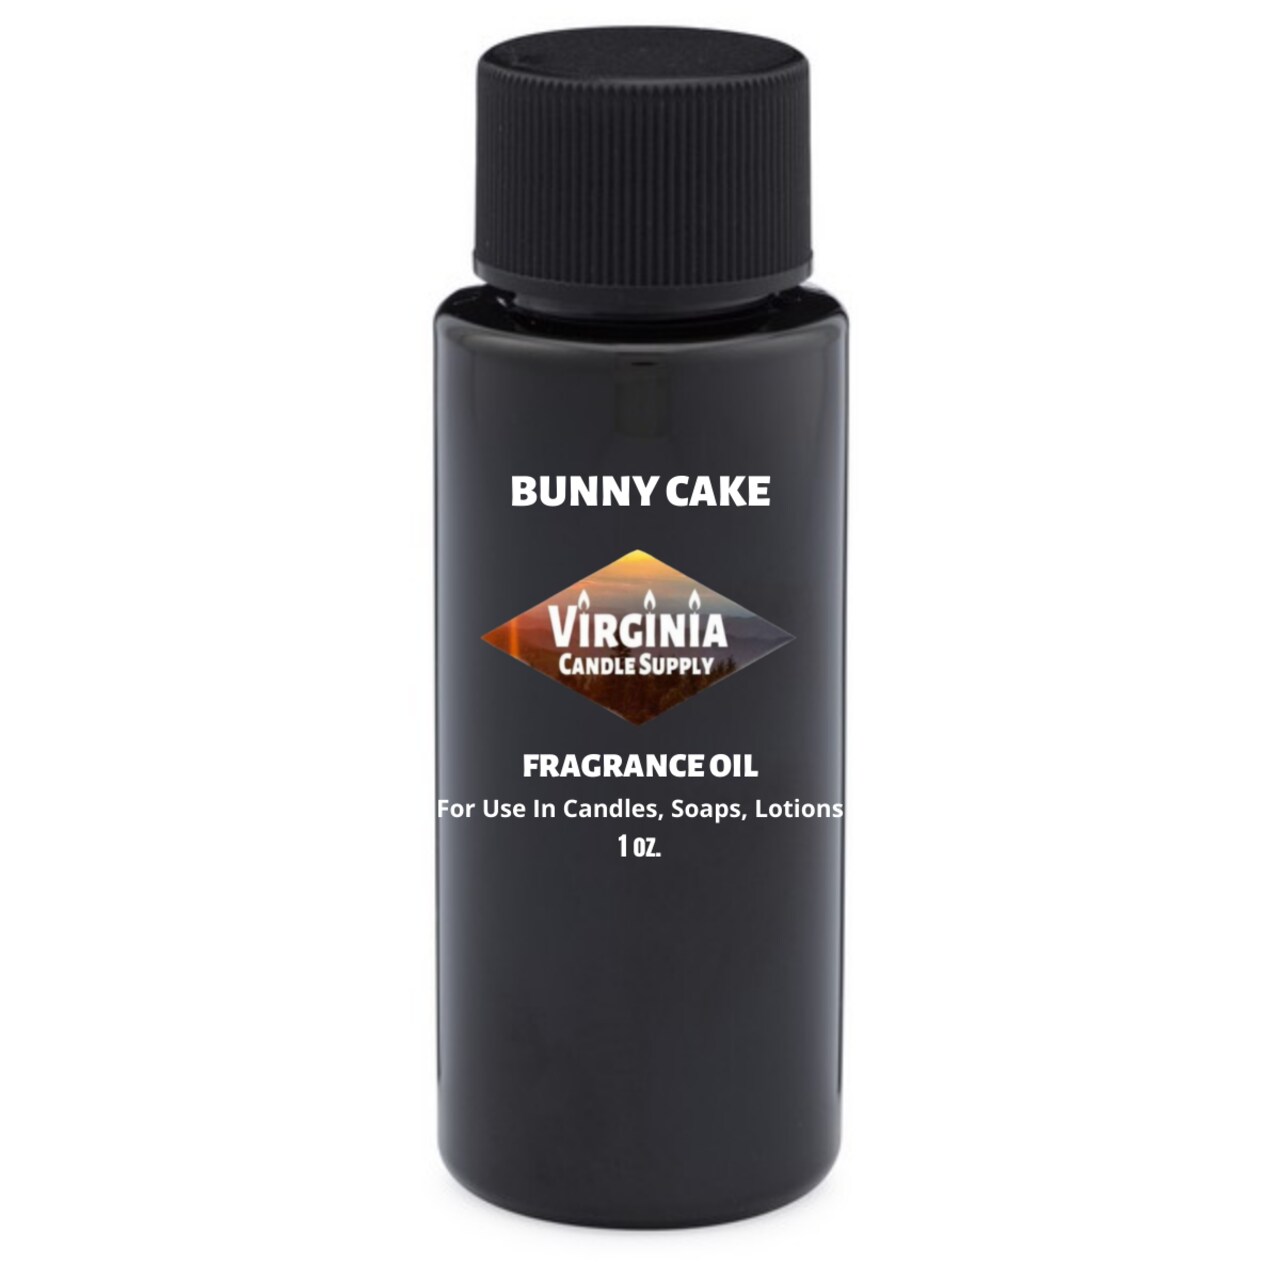 Bunny Cake Fragrance Oil (Our Version of the Brand Name)  (1 oz Bottle) for Candle Making, Soap Making, Tart Making, Room Sprays, Lotions, Car Fresheners, Slime, Bath Bombs, Warmers&#x2026;